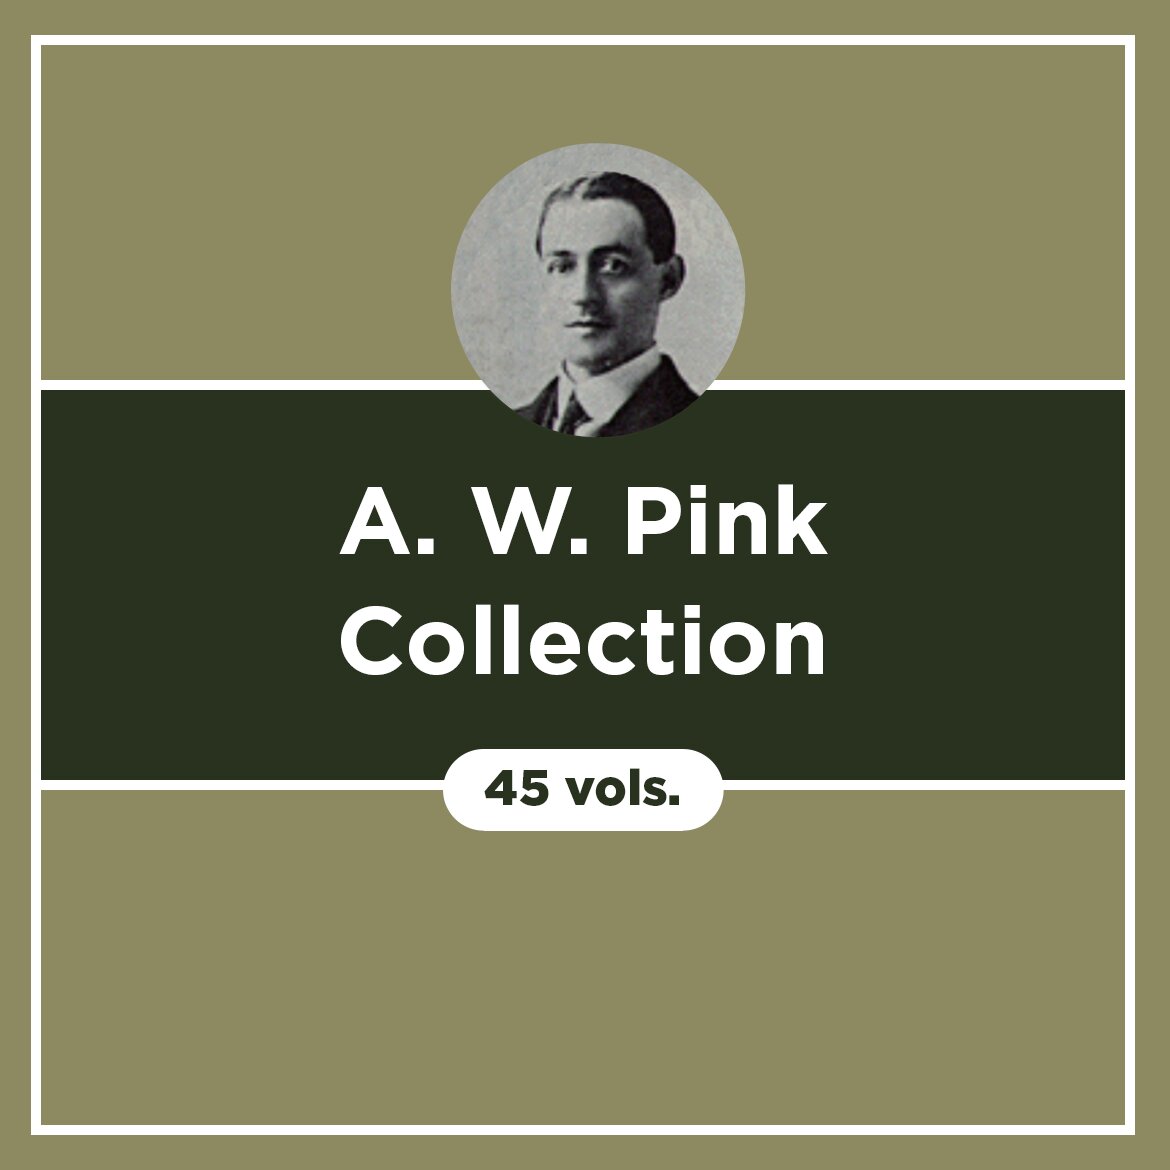 A. W. Pink Collection (45 vols.)